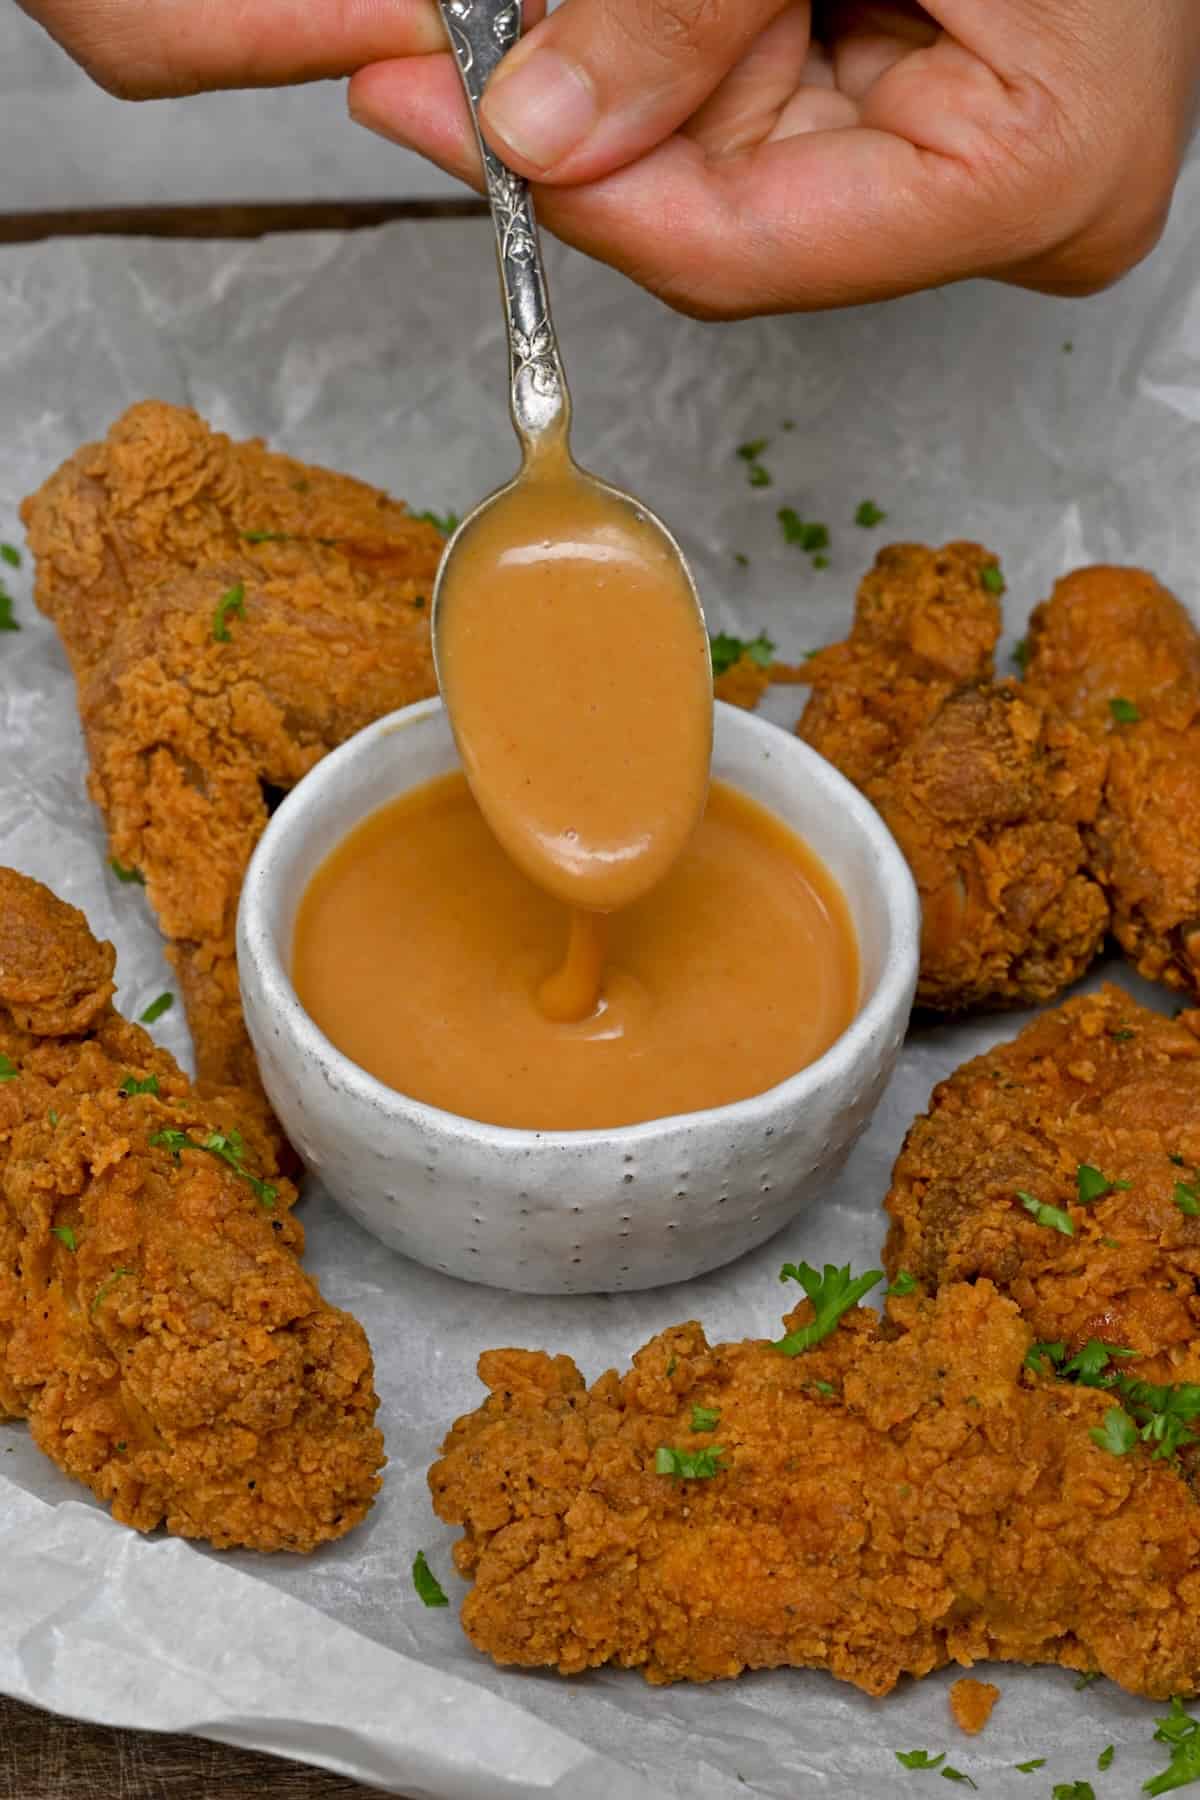 Chick fil a sauce and chicken nuggets